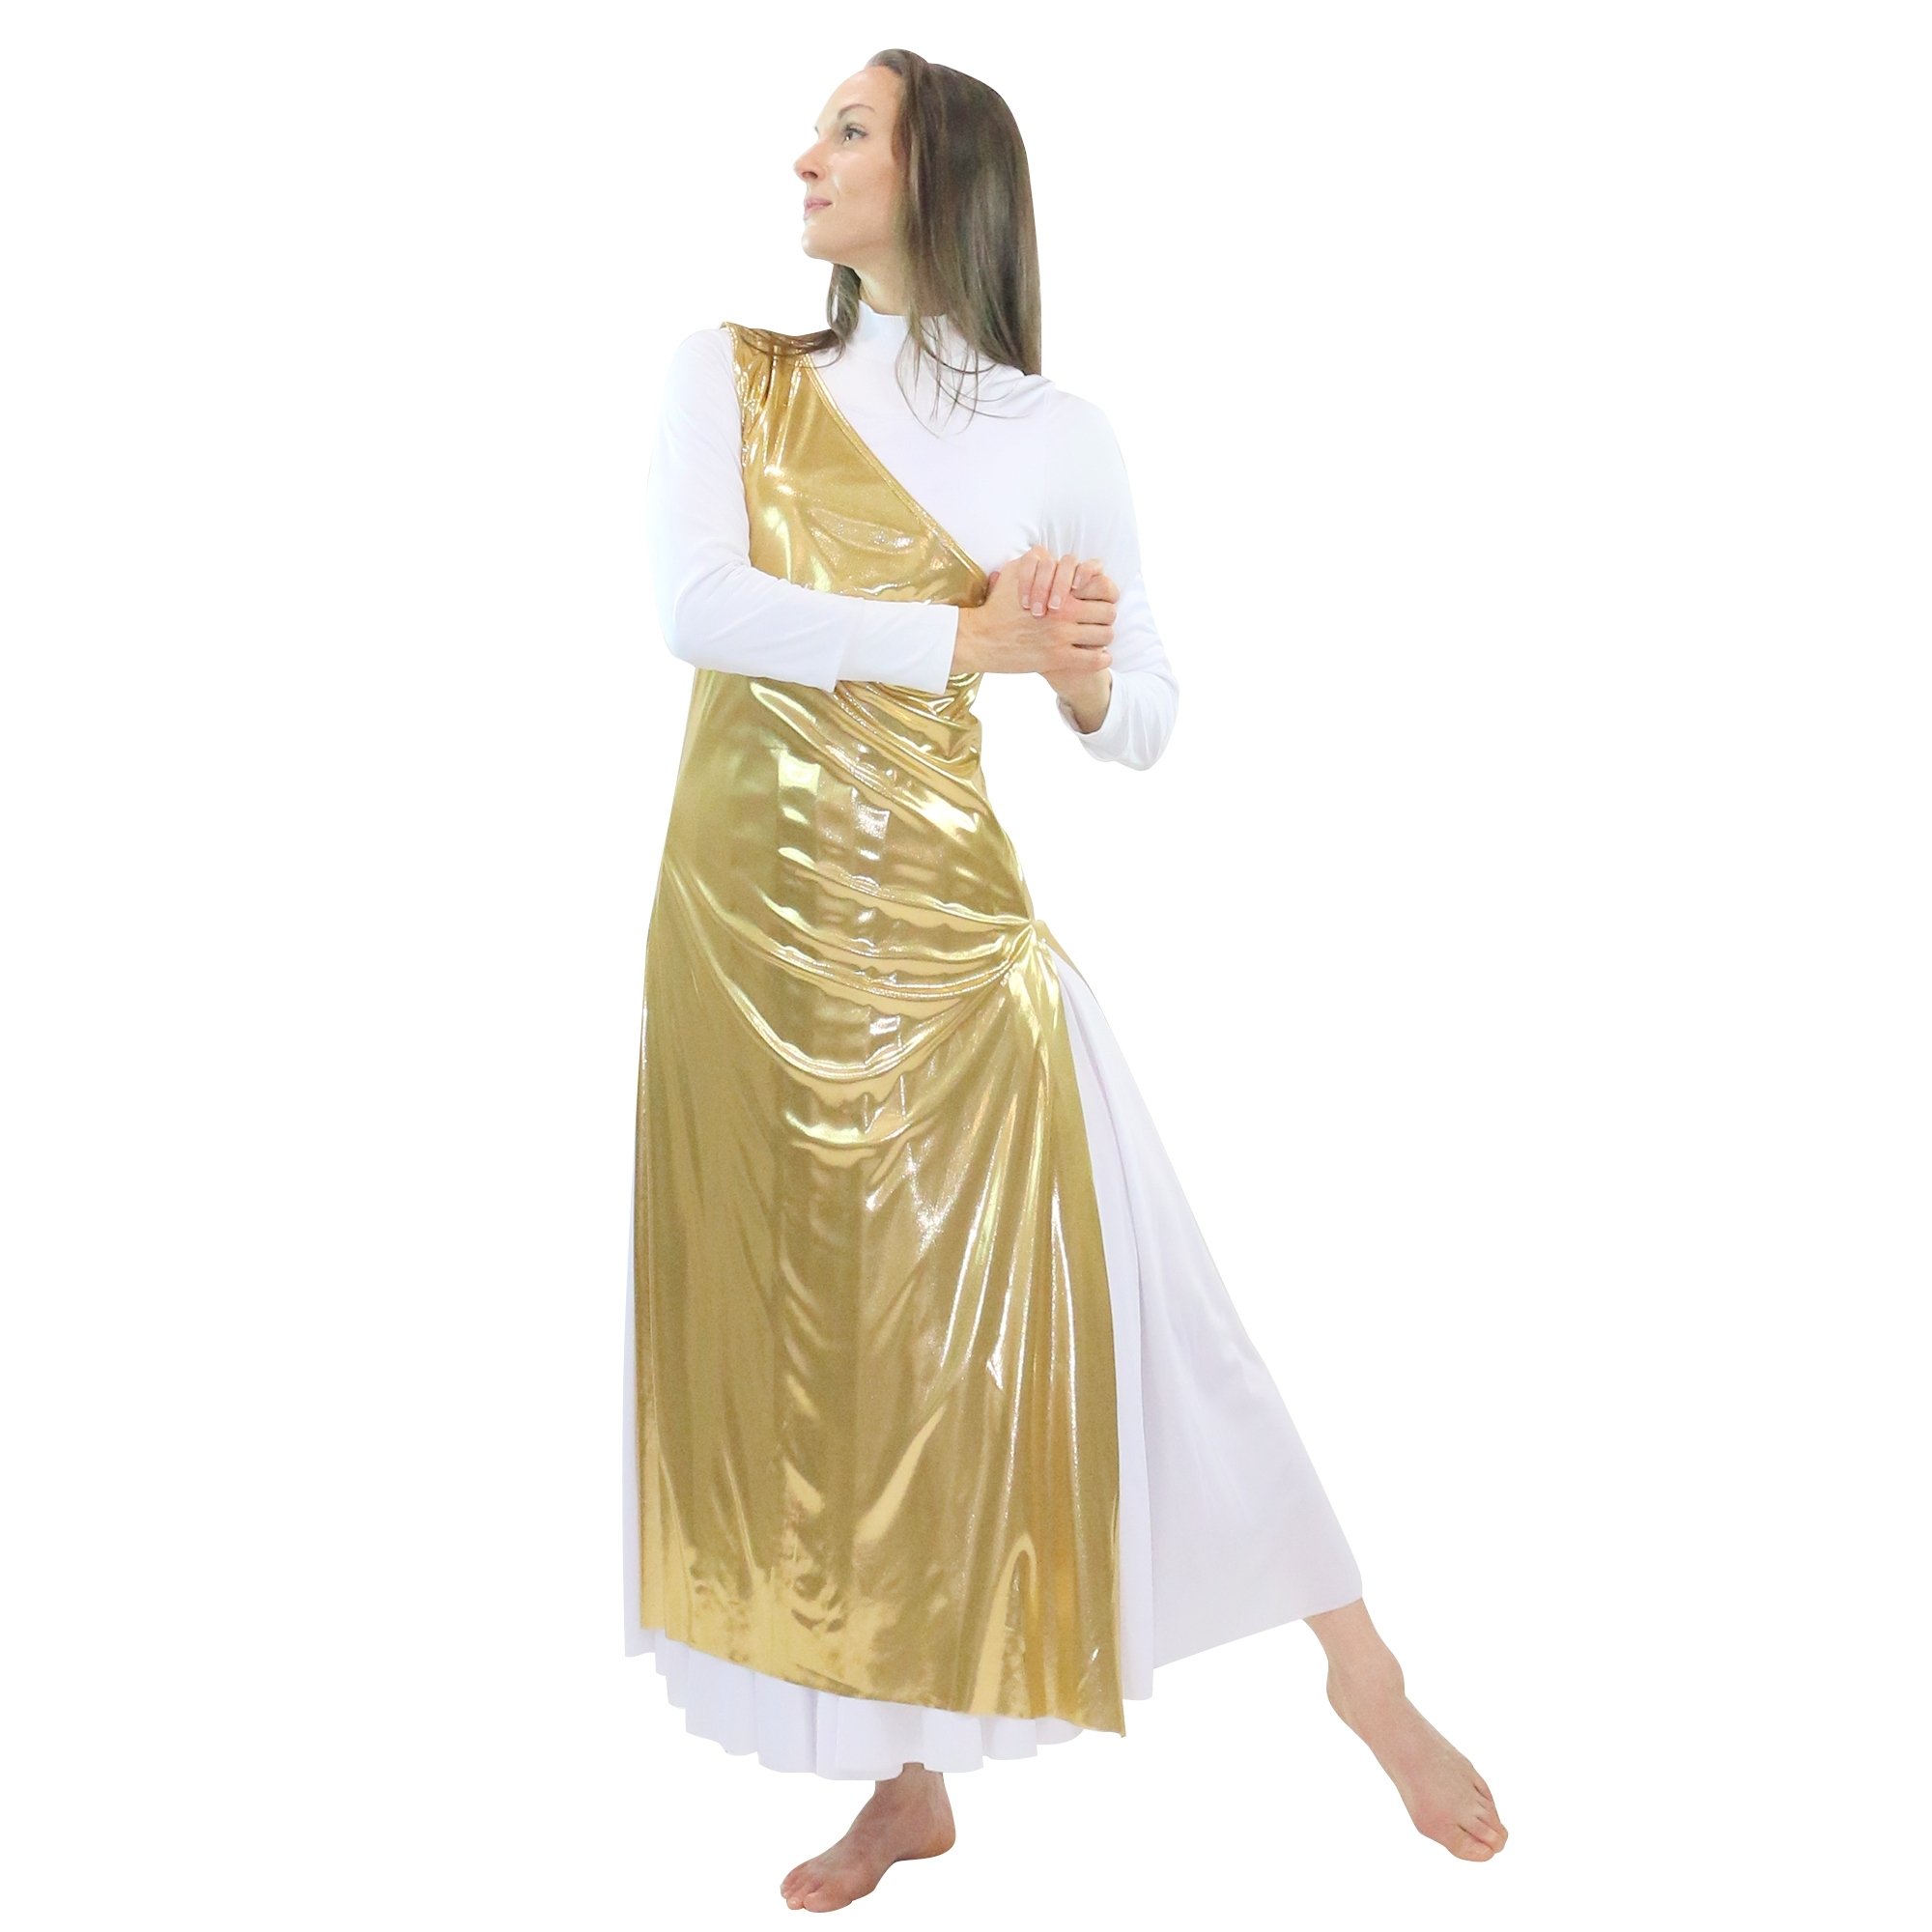 Danzcue Worship Dance Tunic with Side Slits(white dress not included) - Click Image to Close